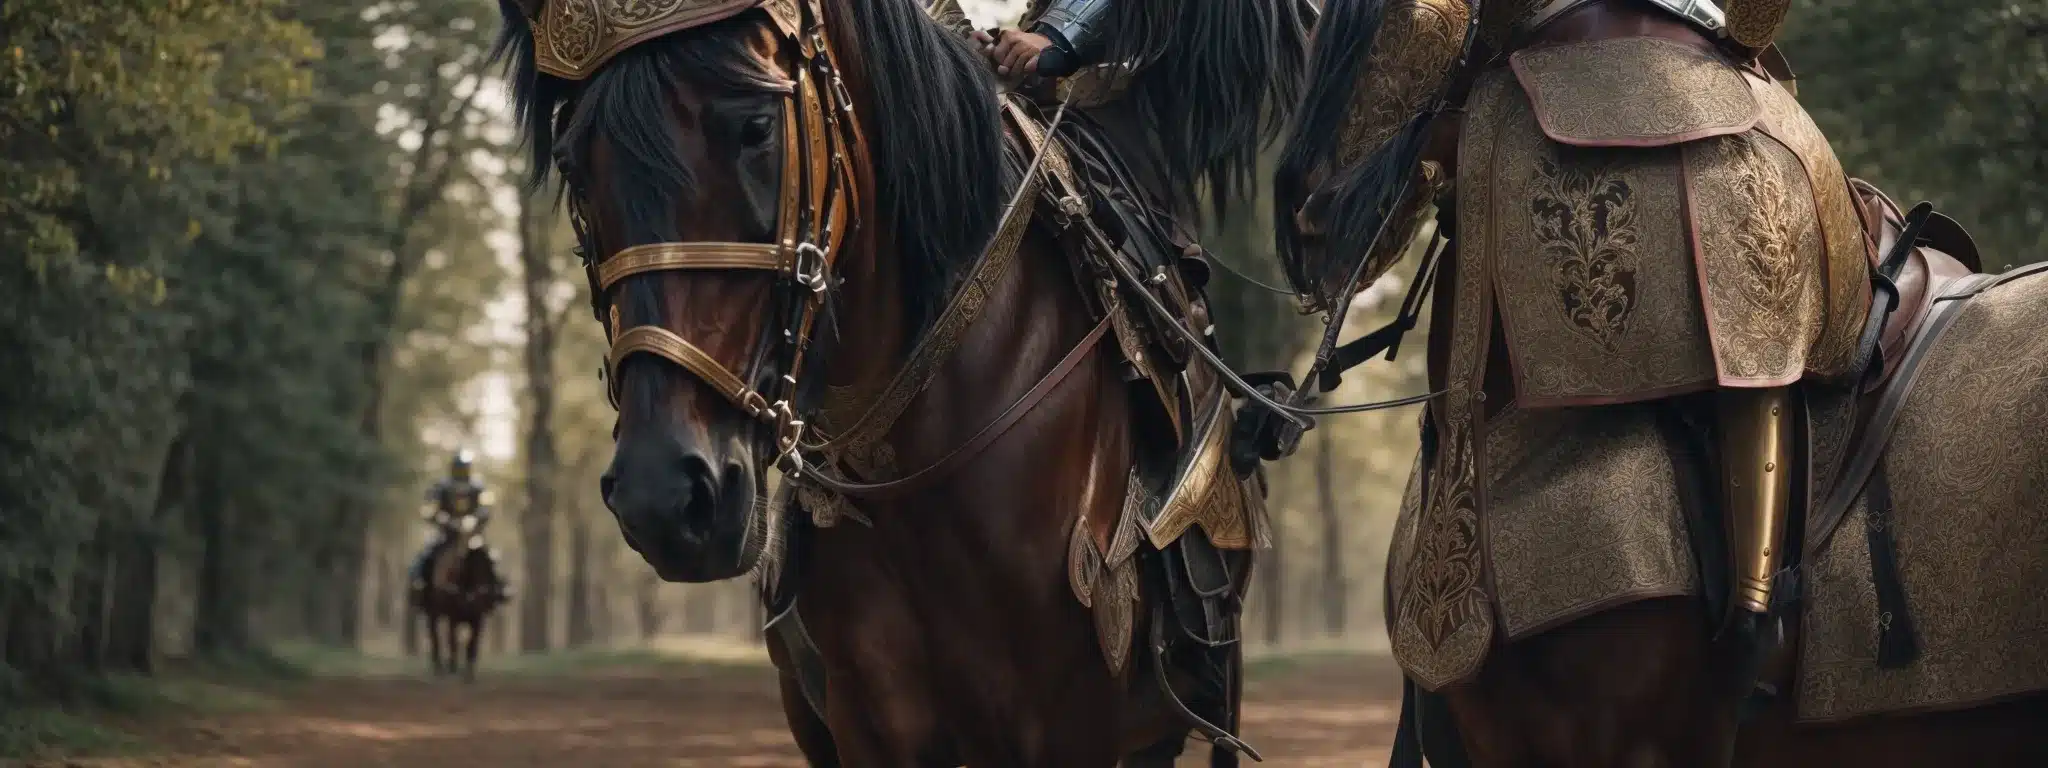 A Knight In Shining Armor Mounted On A Majestic Horse, Bearing An Intricate Shield, Prepares To Enter A Vibrant Medieval Tournament.